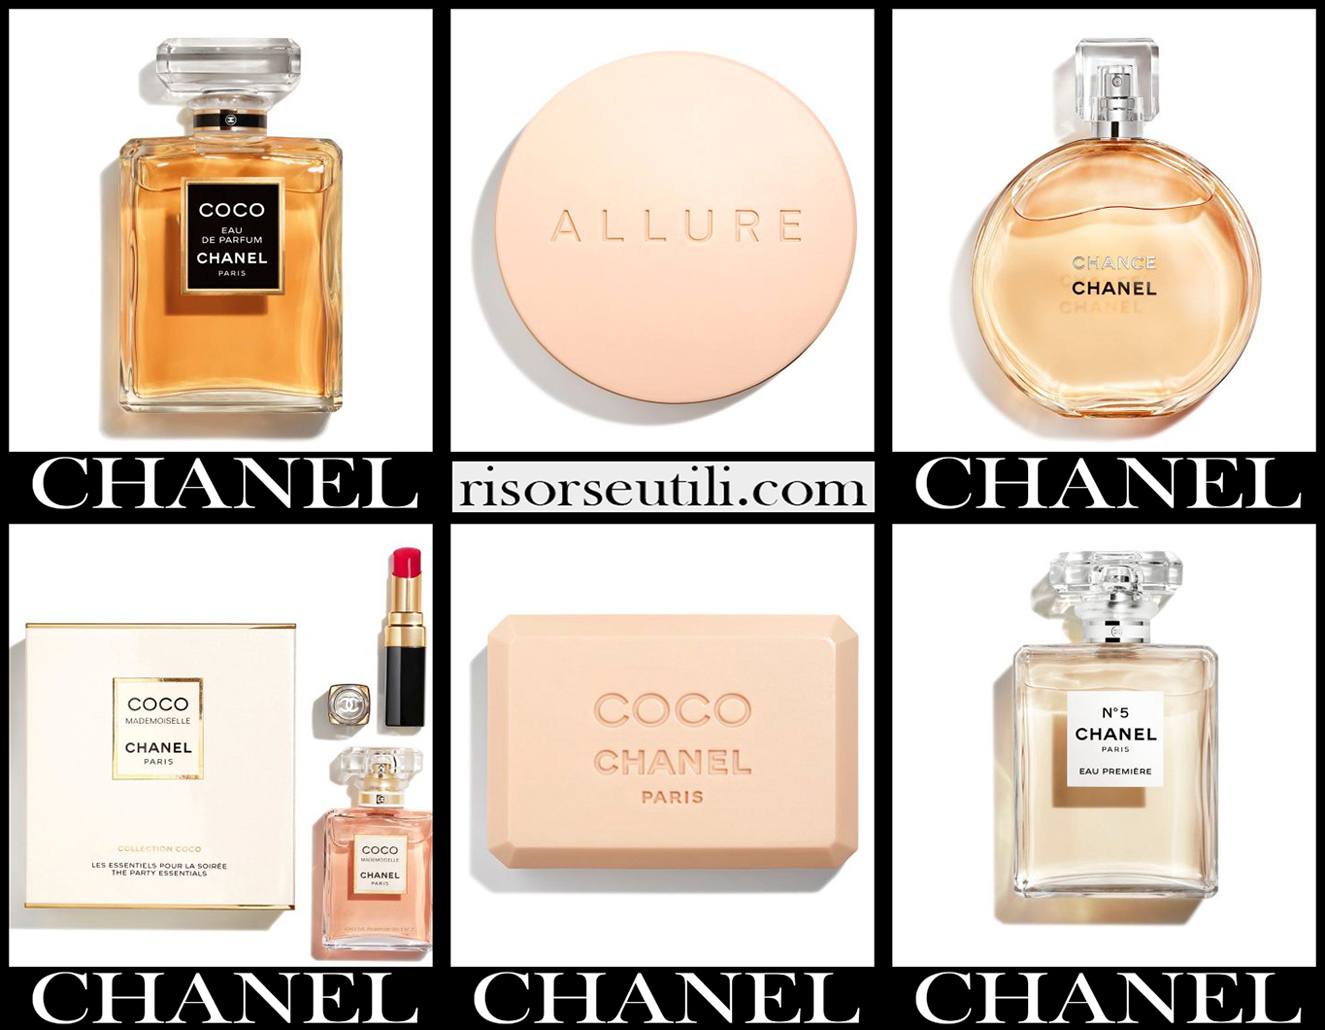 New arrivals Chanel perfumes 2021 gift ideas for women